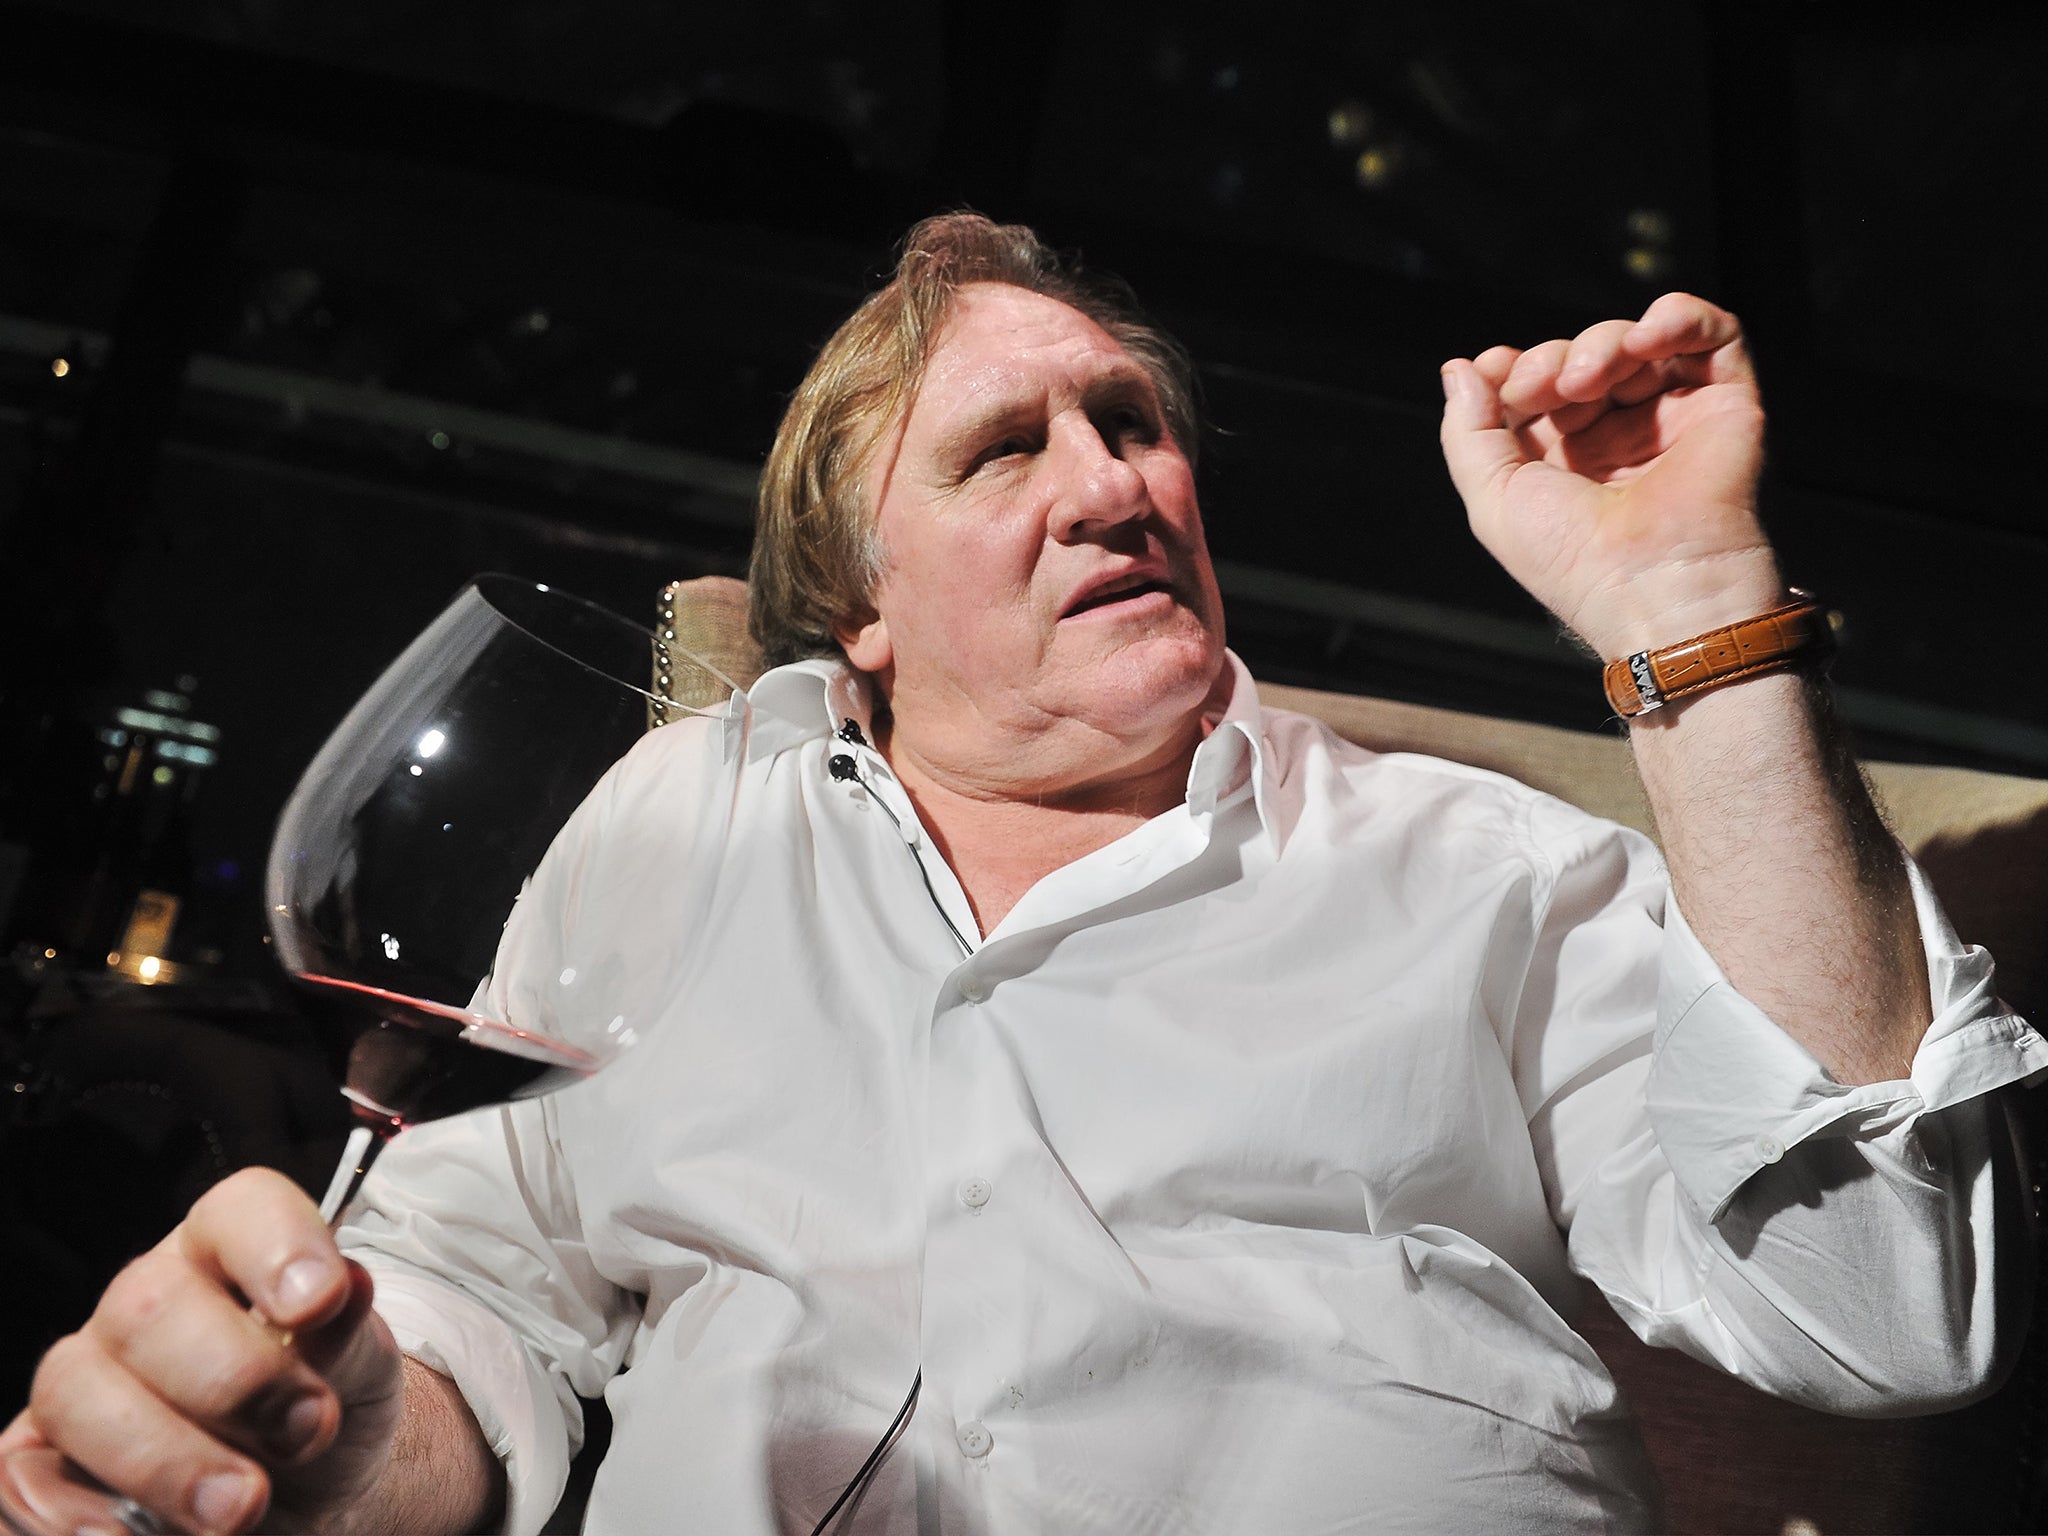 Gérard Depardieu recently revealed he drinks 14 bottles of wine a day